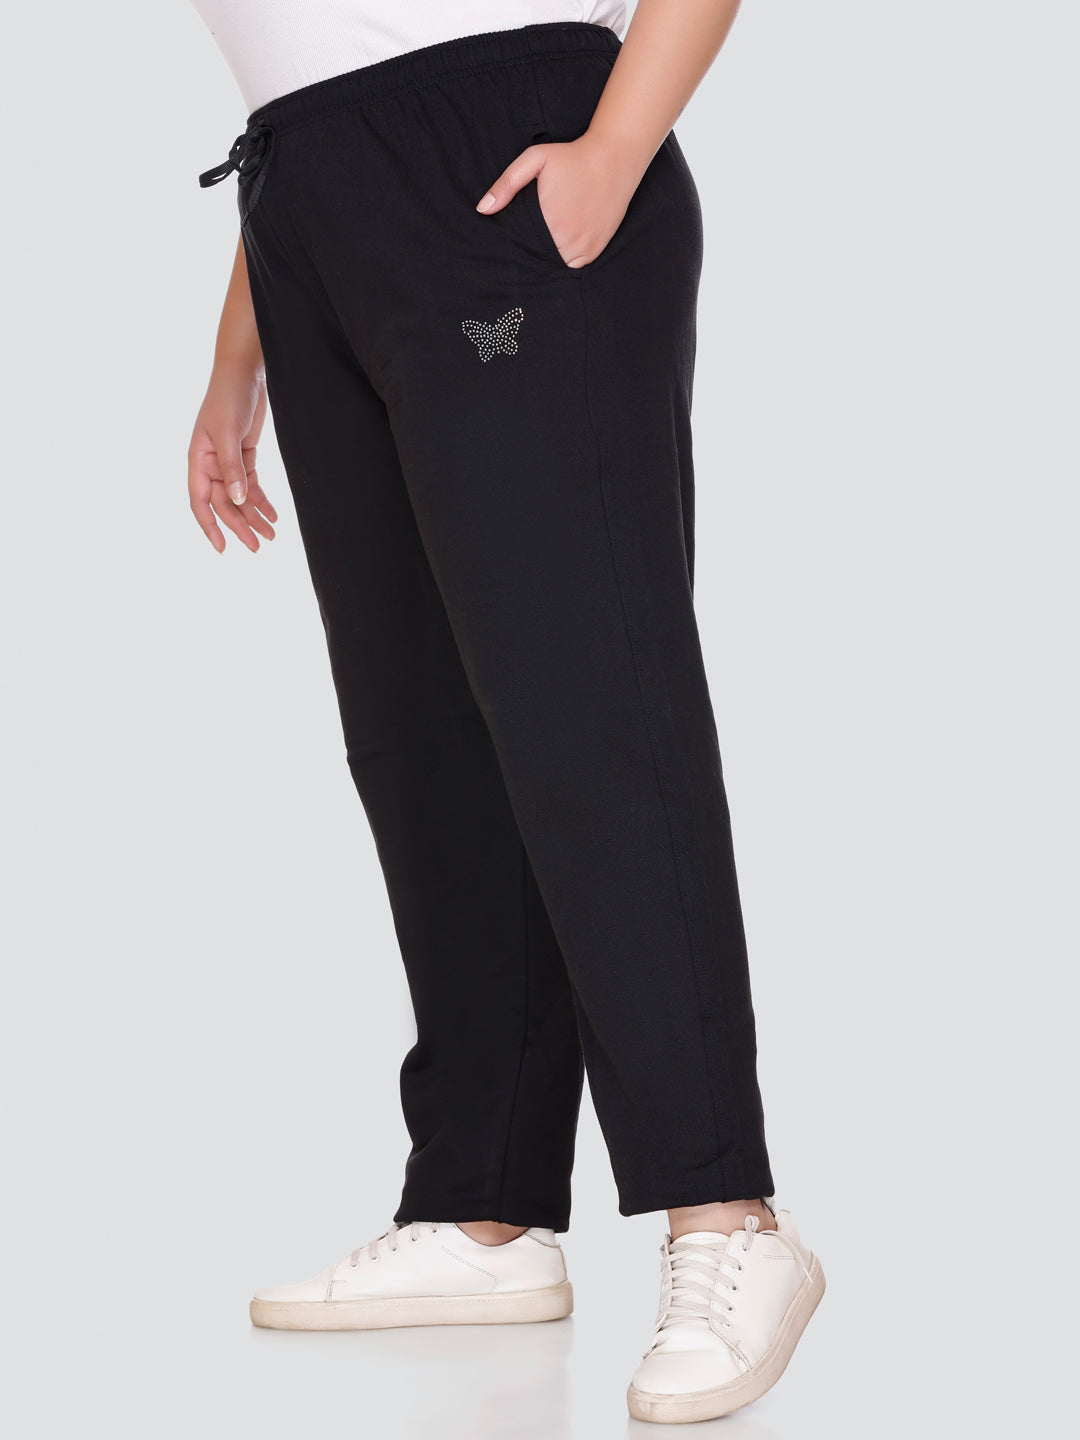 Buy Trouser & Pants for Women Online Start at Just Rs. 300